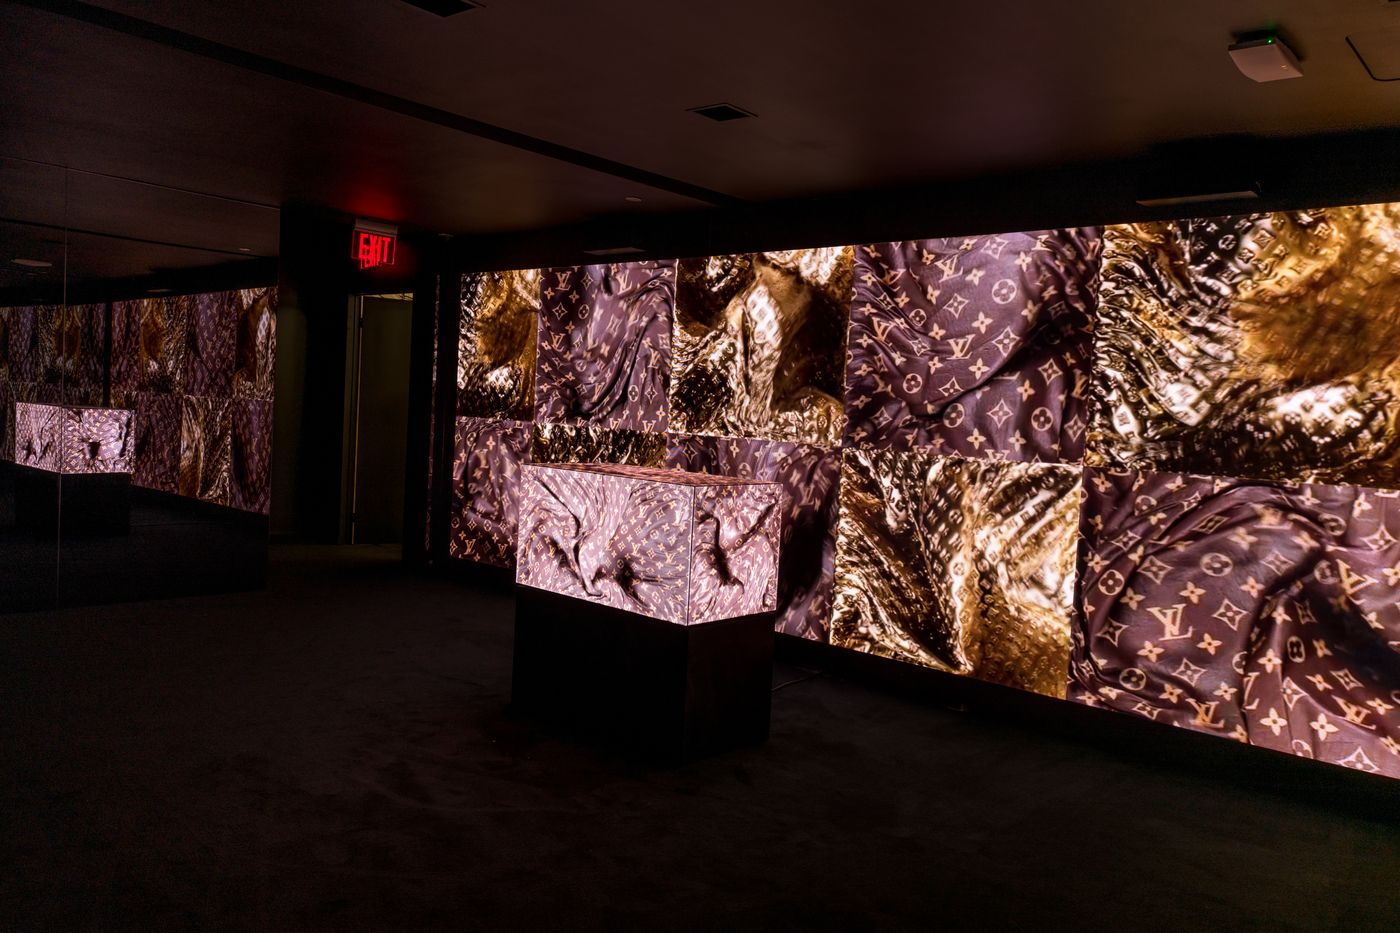 The Free NYC Louis Vuitton Exhibit You Don't Want to Miss